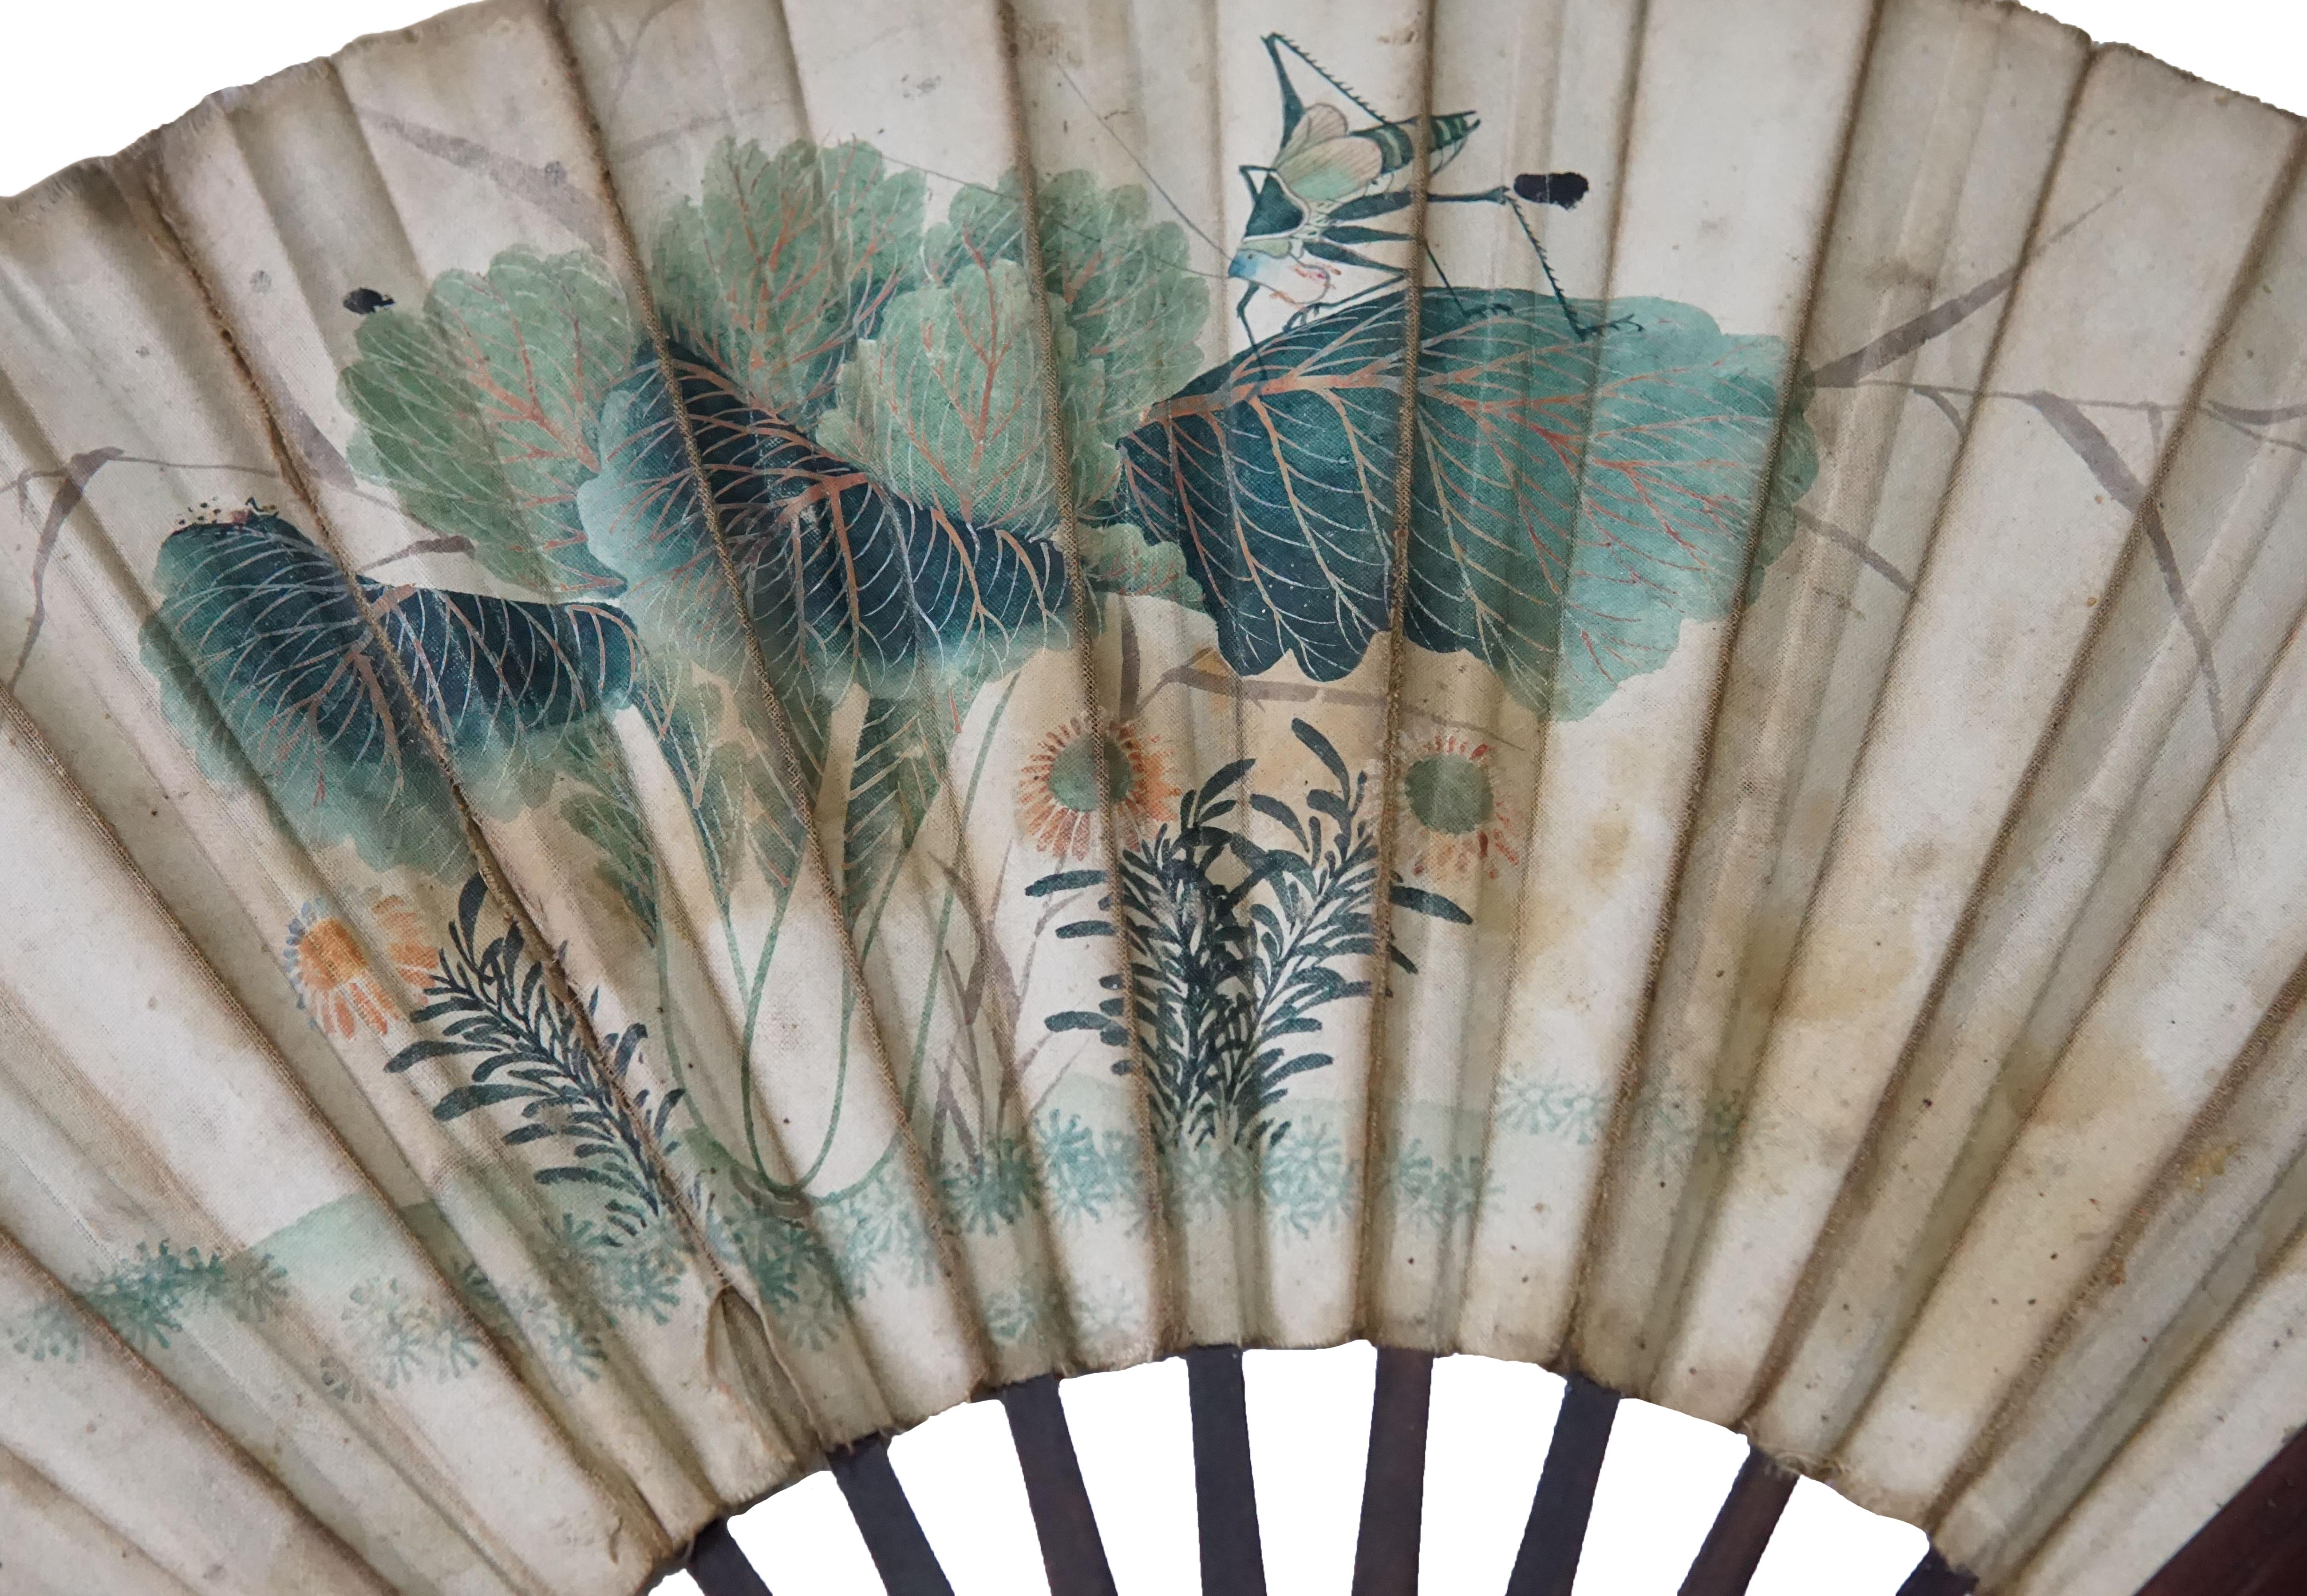 A Chinese hand-painted fan with hand-painted calligraphy (with two different drawing on either side). The fan's frame is crafted from bamboo and also includes wood engravings. The calligraphy features flowers, leaves and a grass hopper on one side &